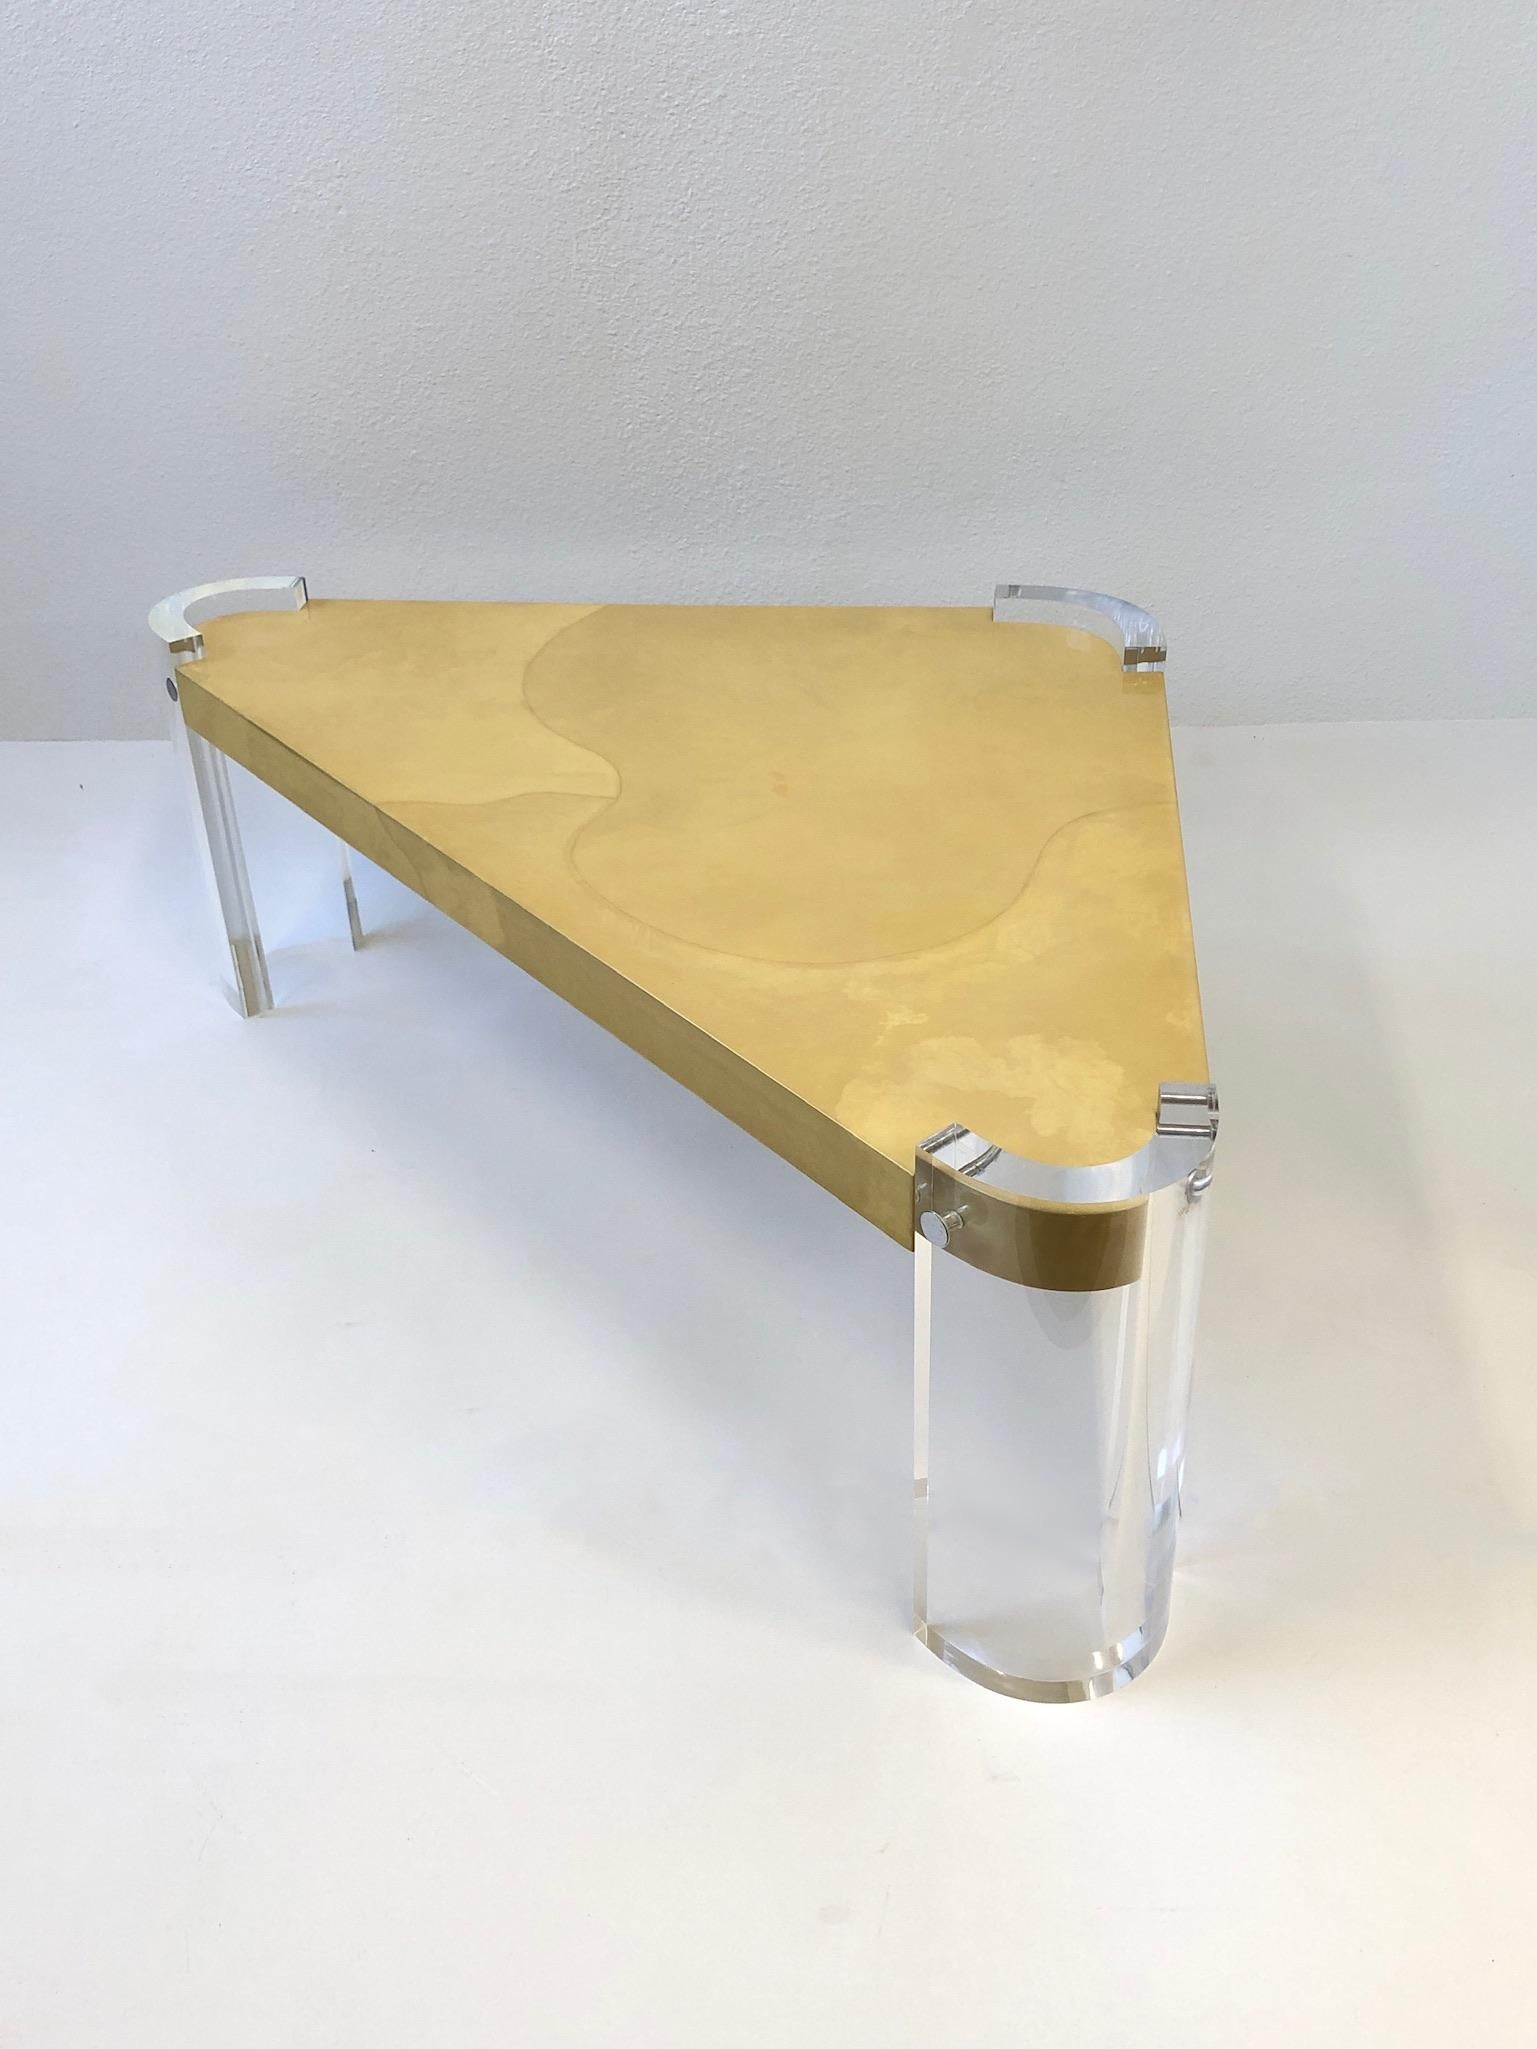 triangular shaped end tables